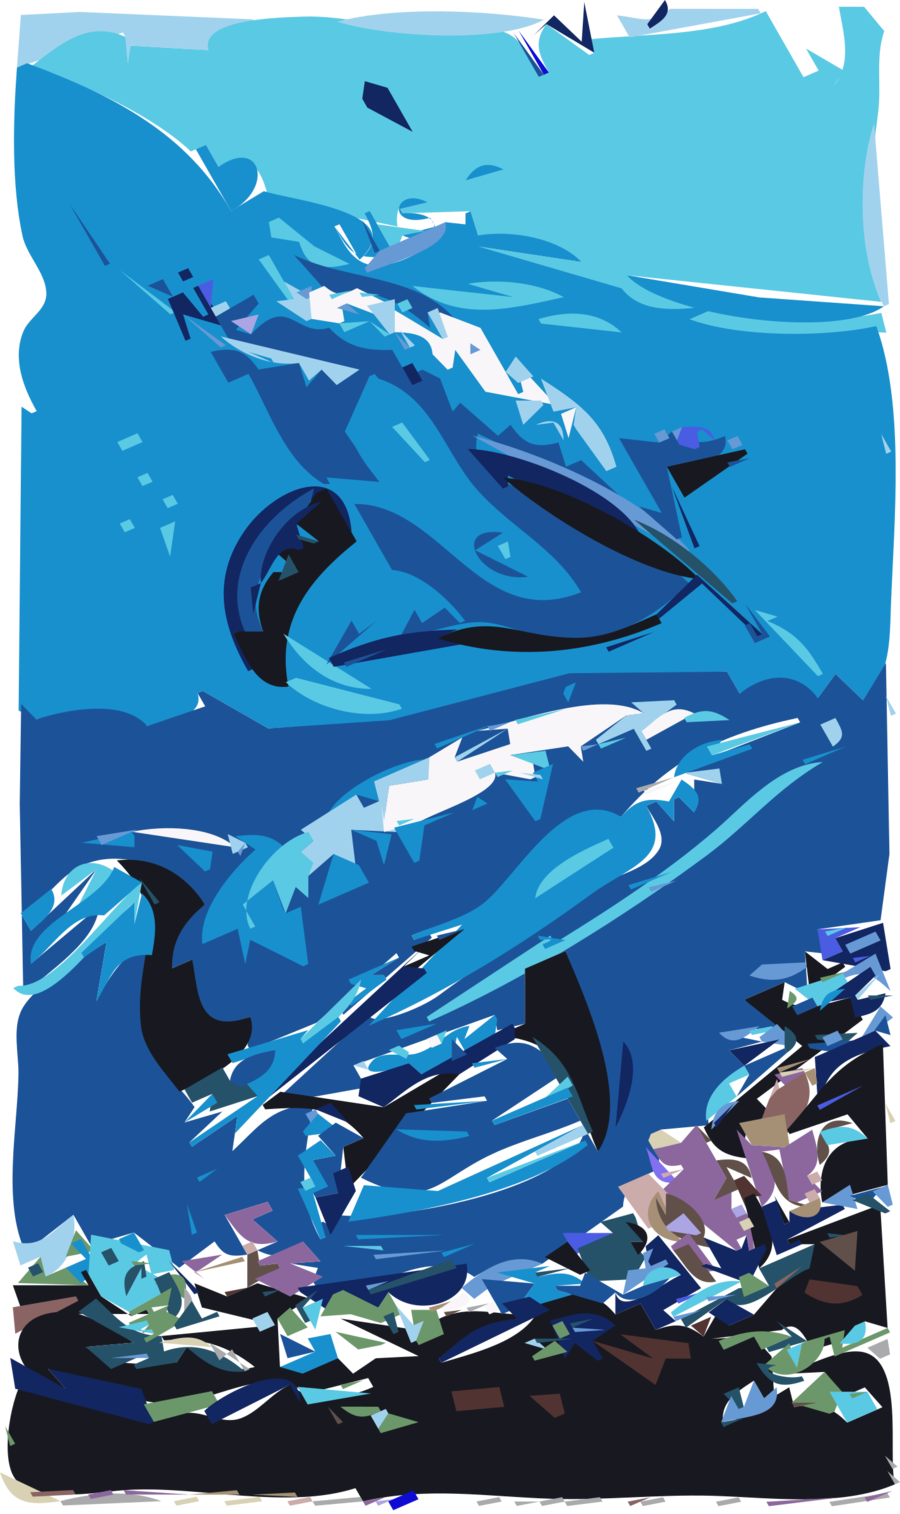 clipart dolphin abstract